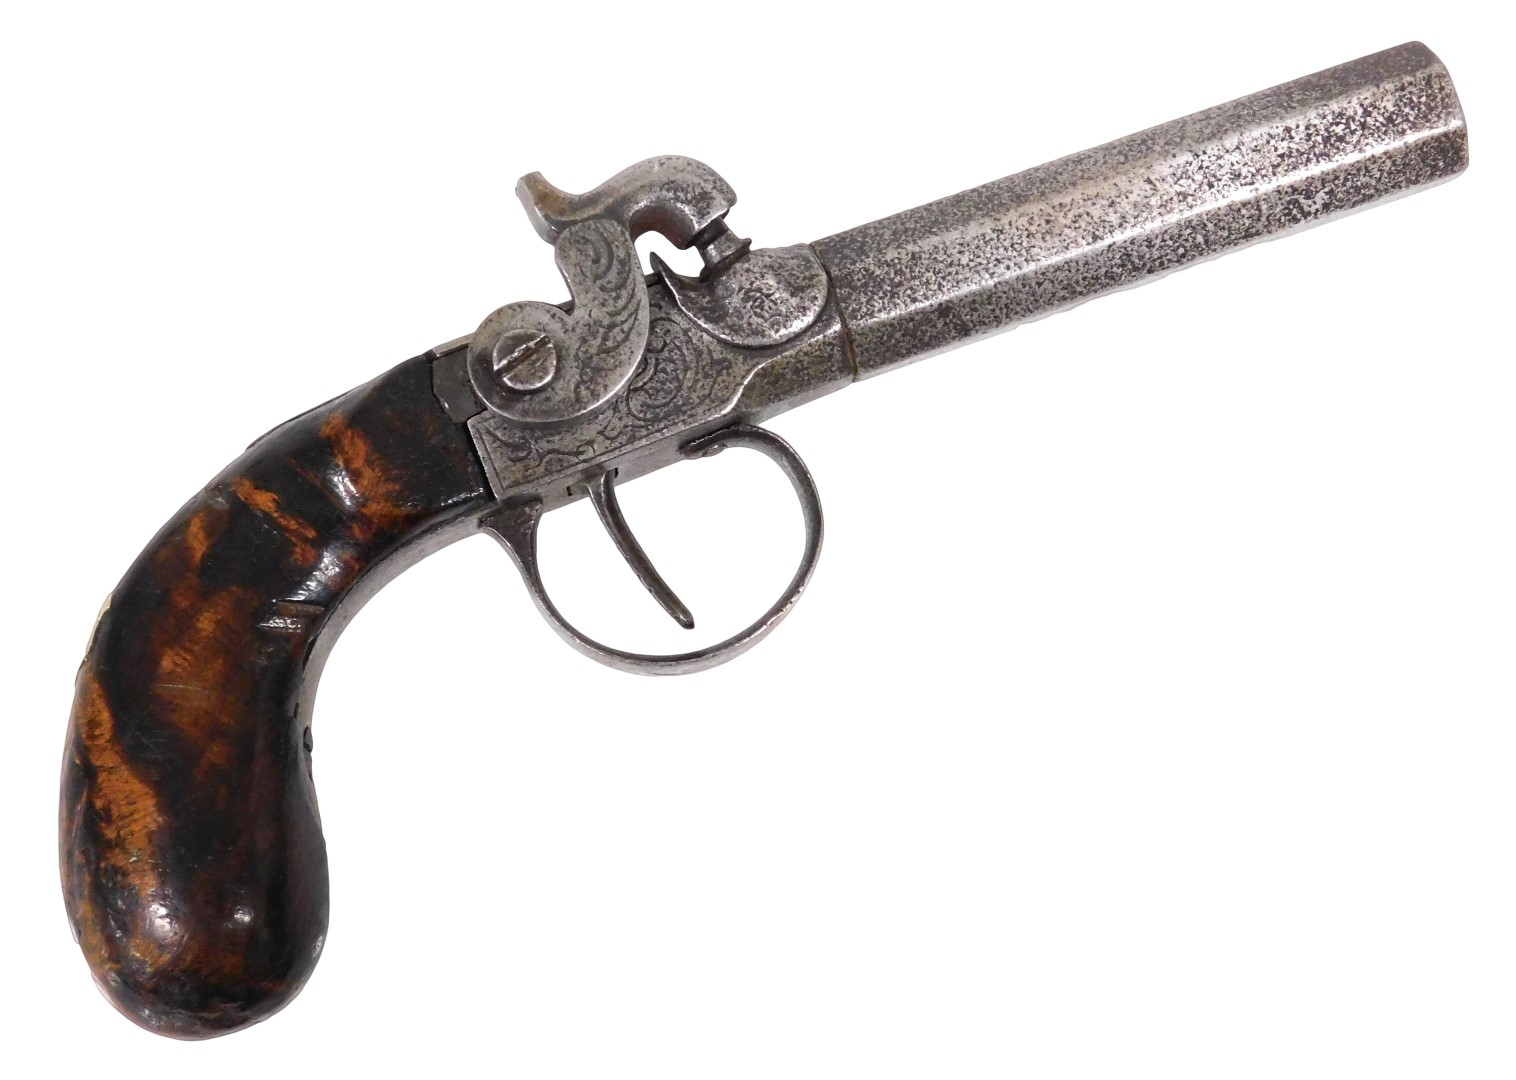 A 19thC side lock percussion cap pocket pistol, with an 8cm long octagonal barrel and walnut grip, 1